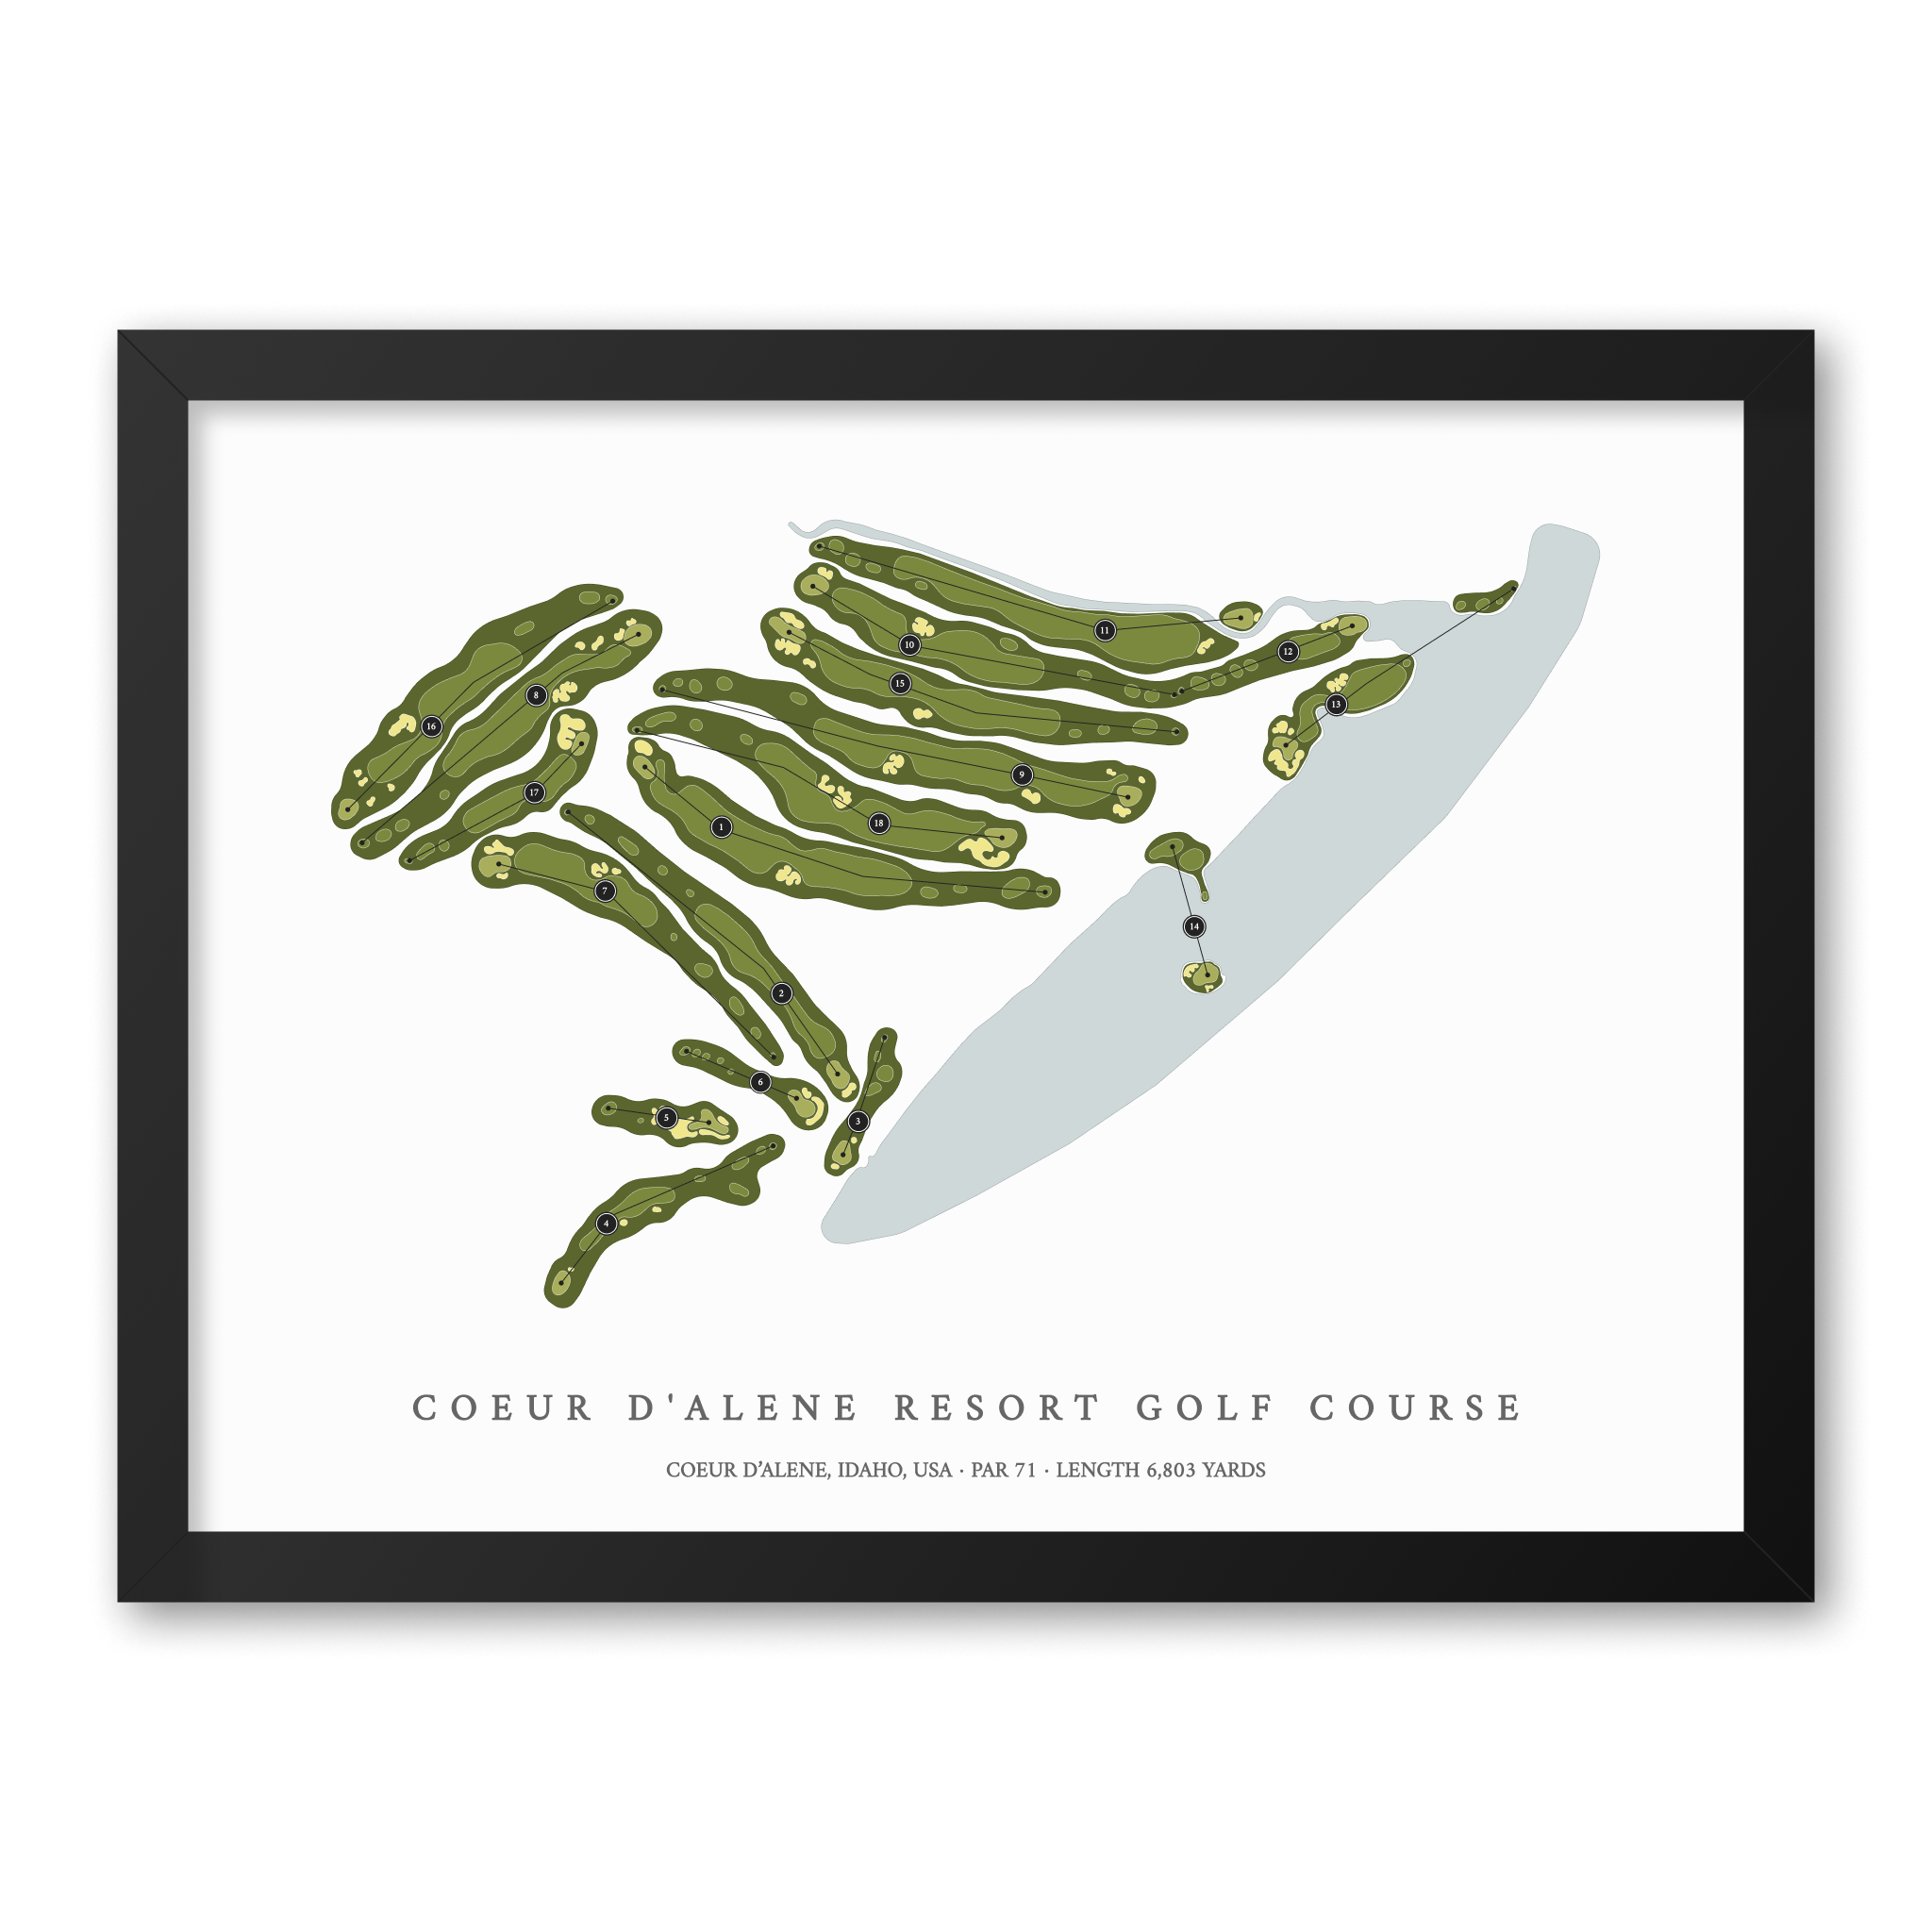 Coeur D Alene Resort Golf Course| Golf Course Print | Black Frame With Hole Numbers #hole numbers_yes